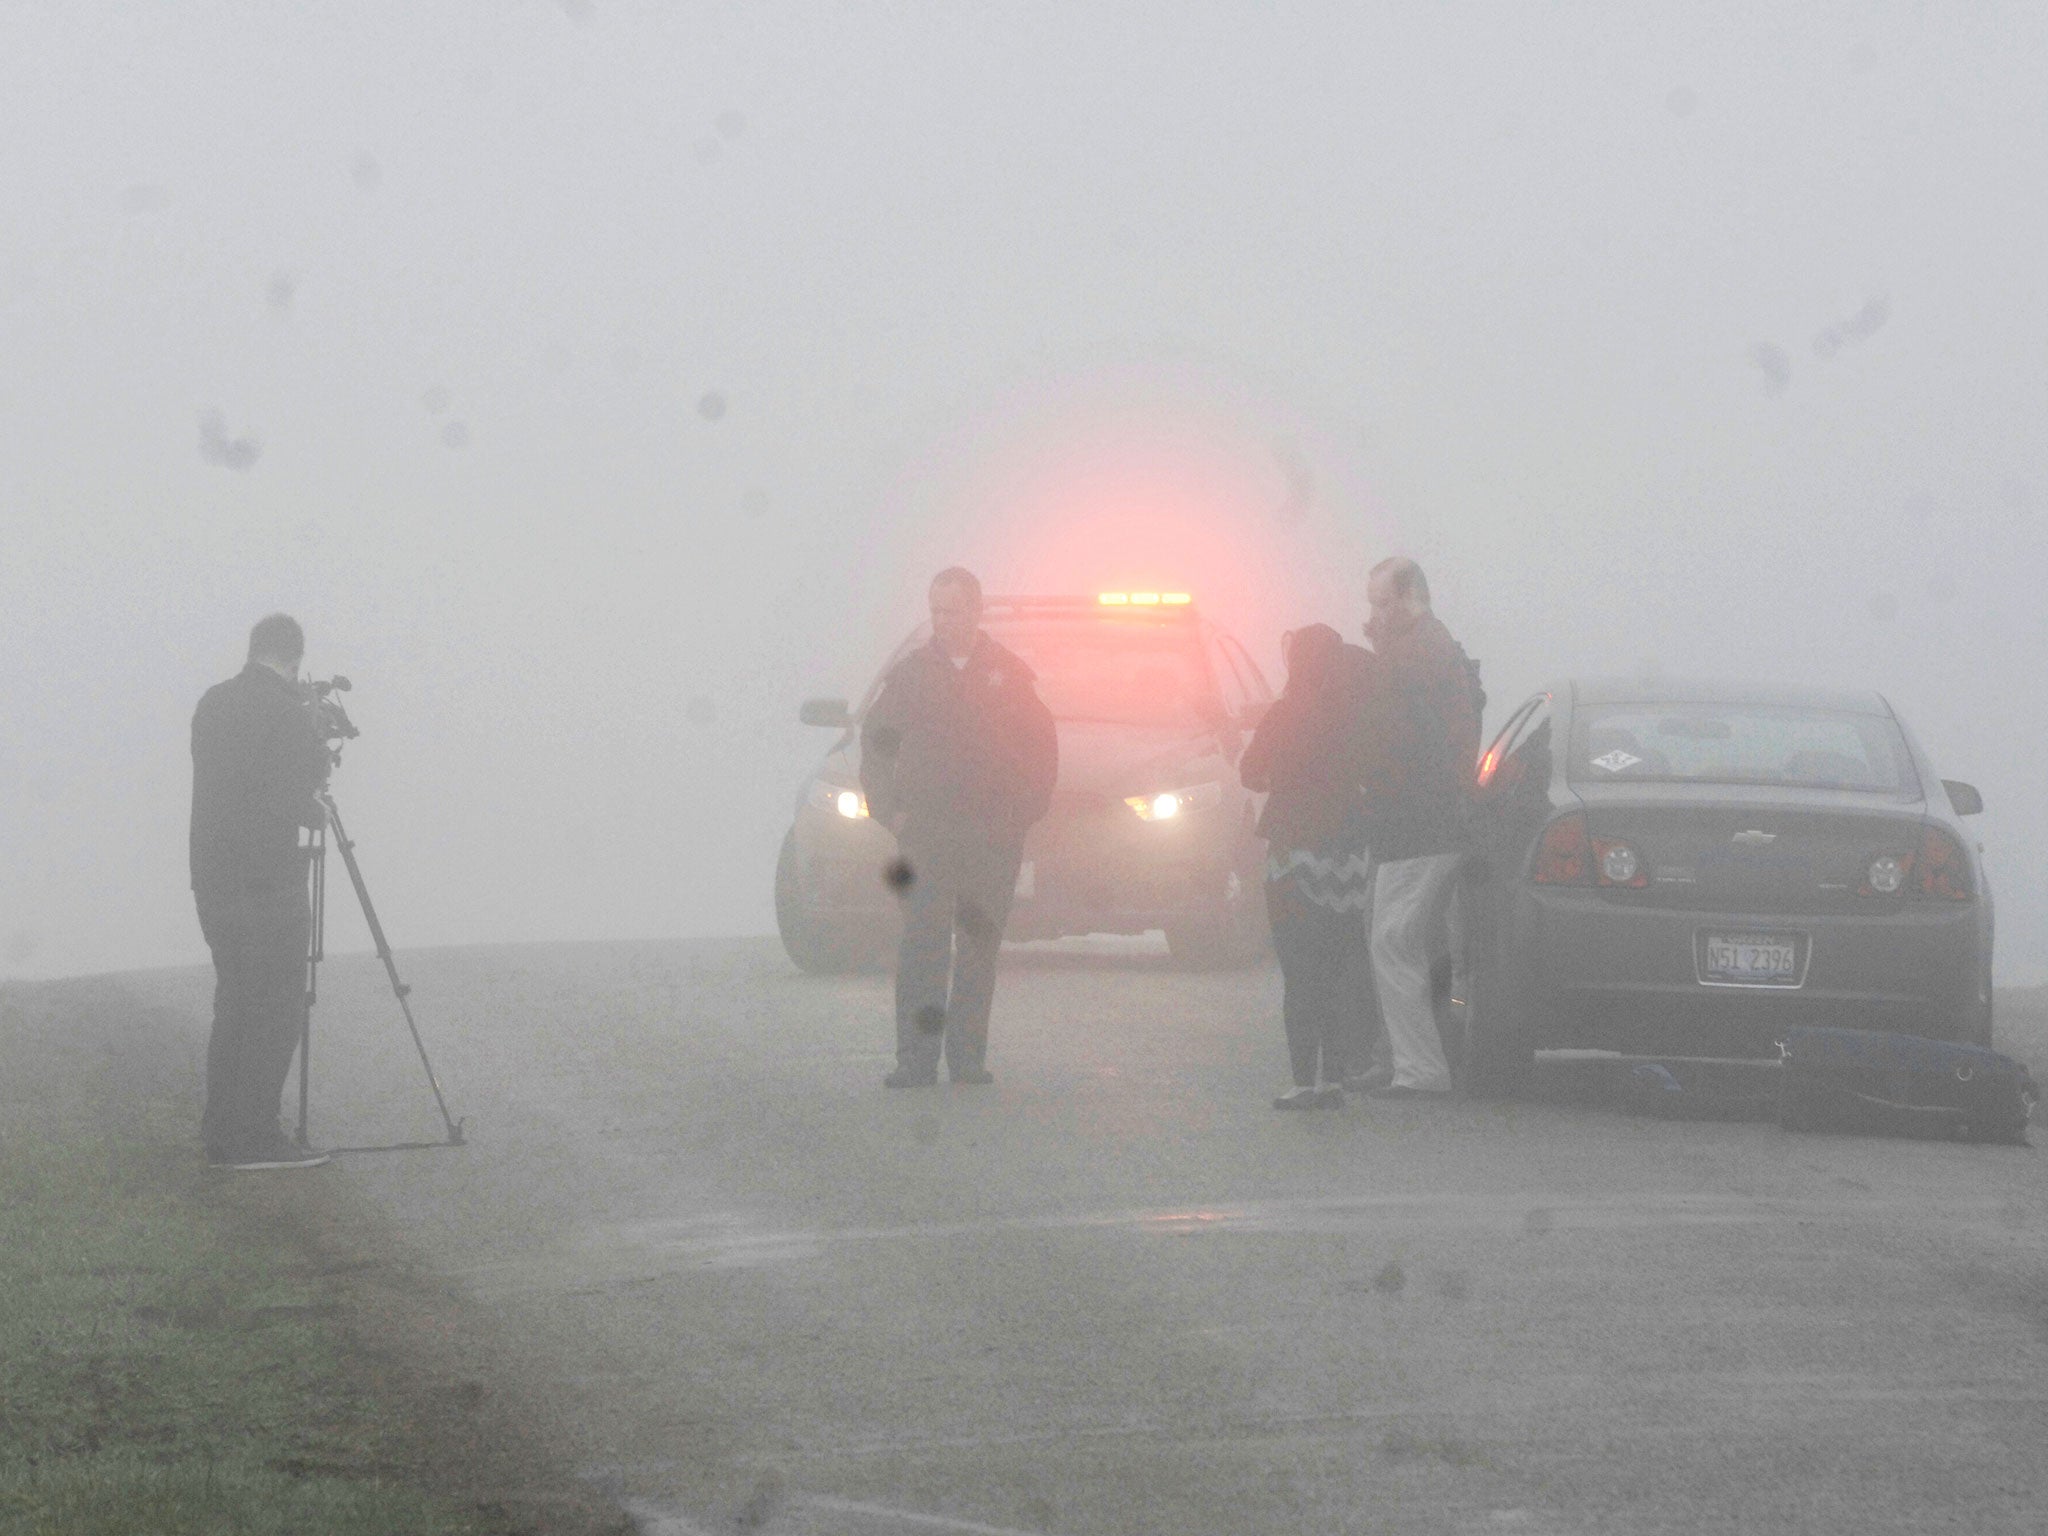 Emergency personnel and media gather at the scene of the plane crash near Bloomington